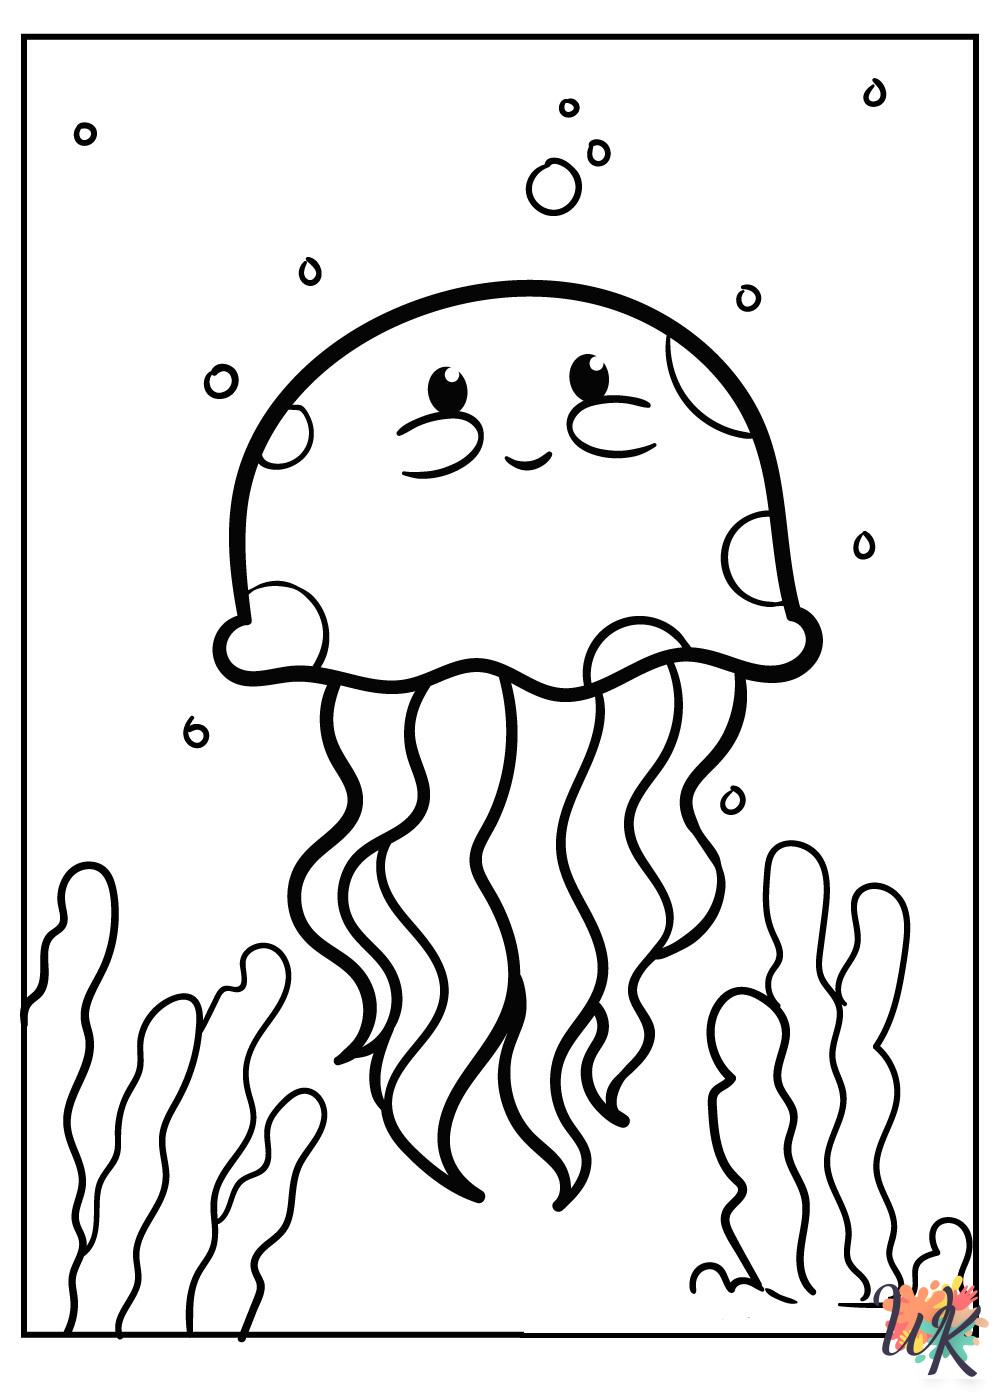 Under The Sea ornaments coloring pages